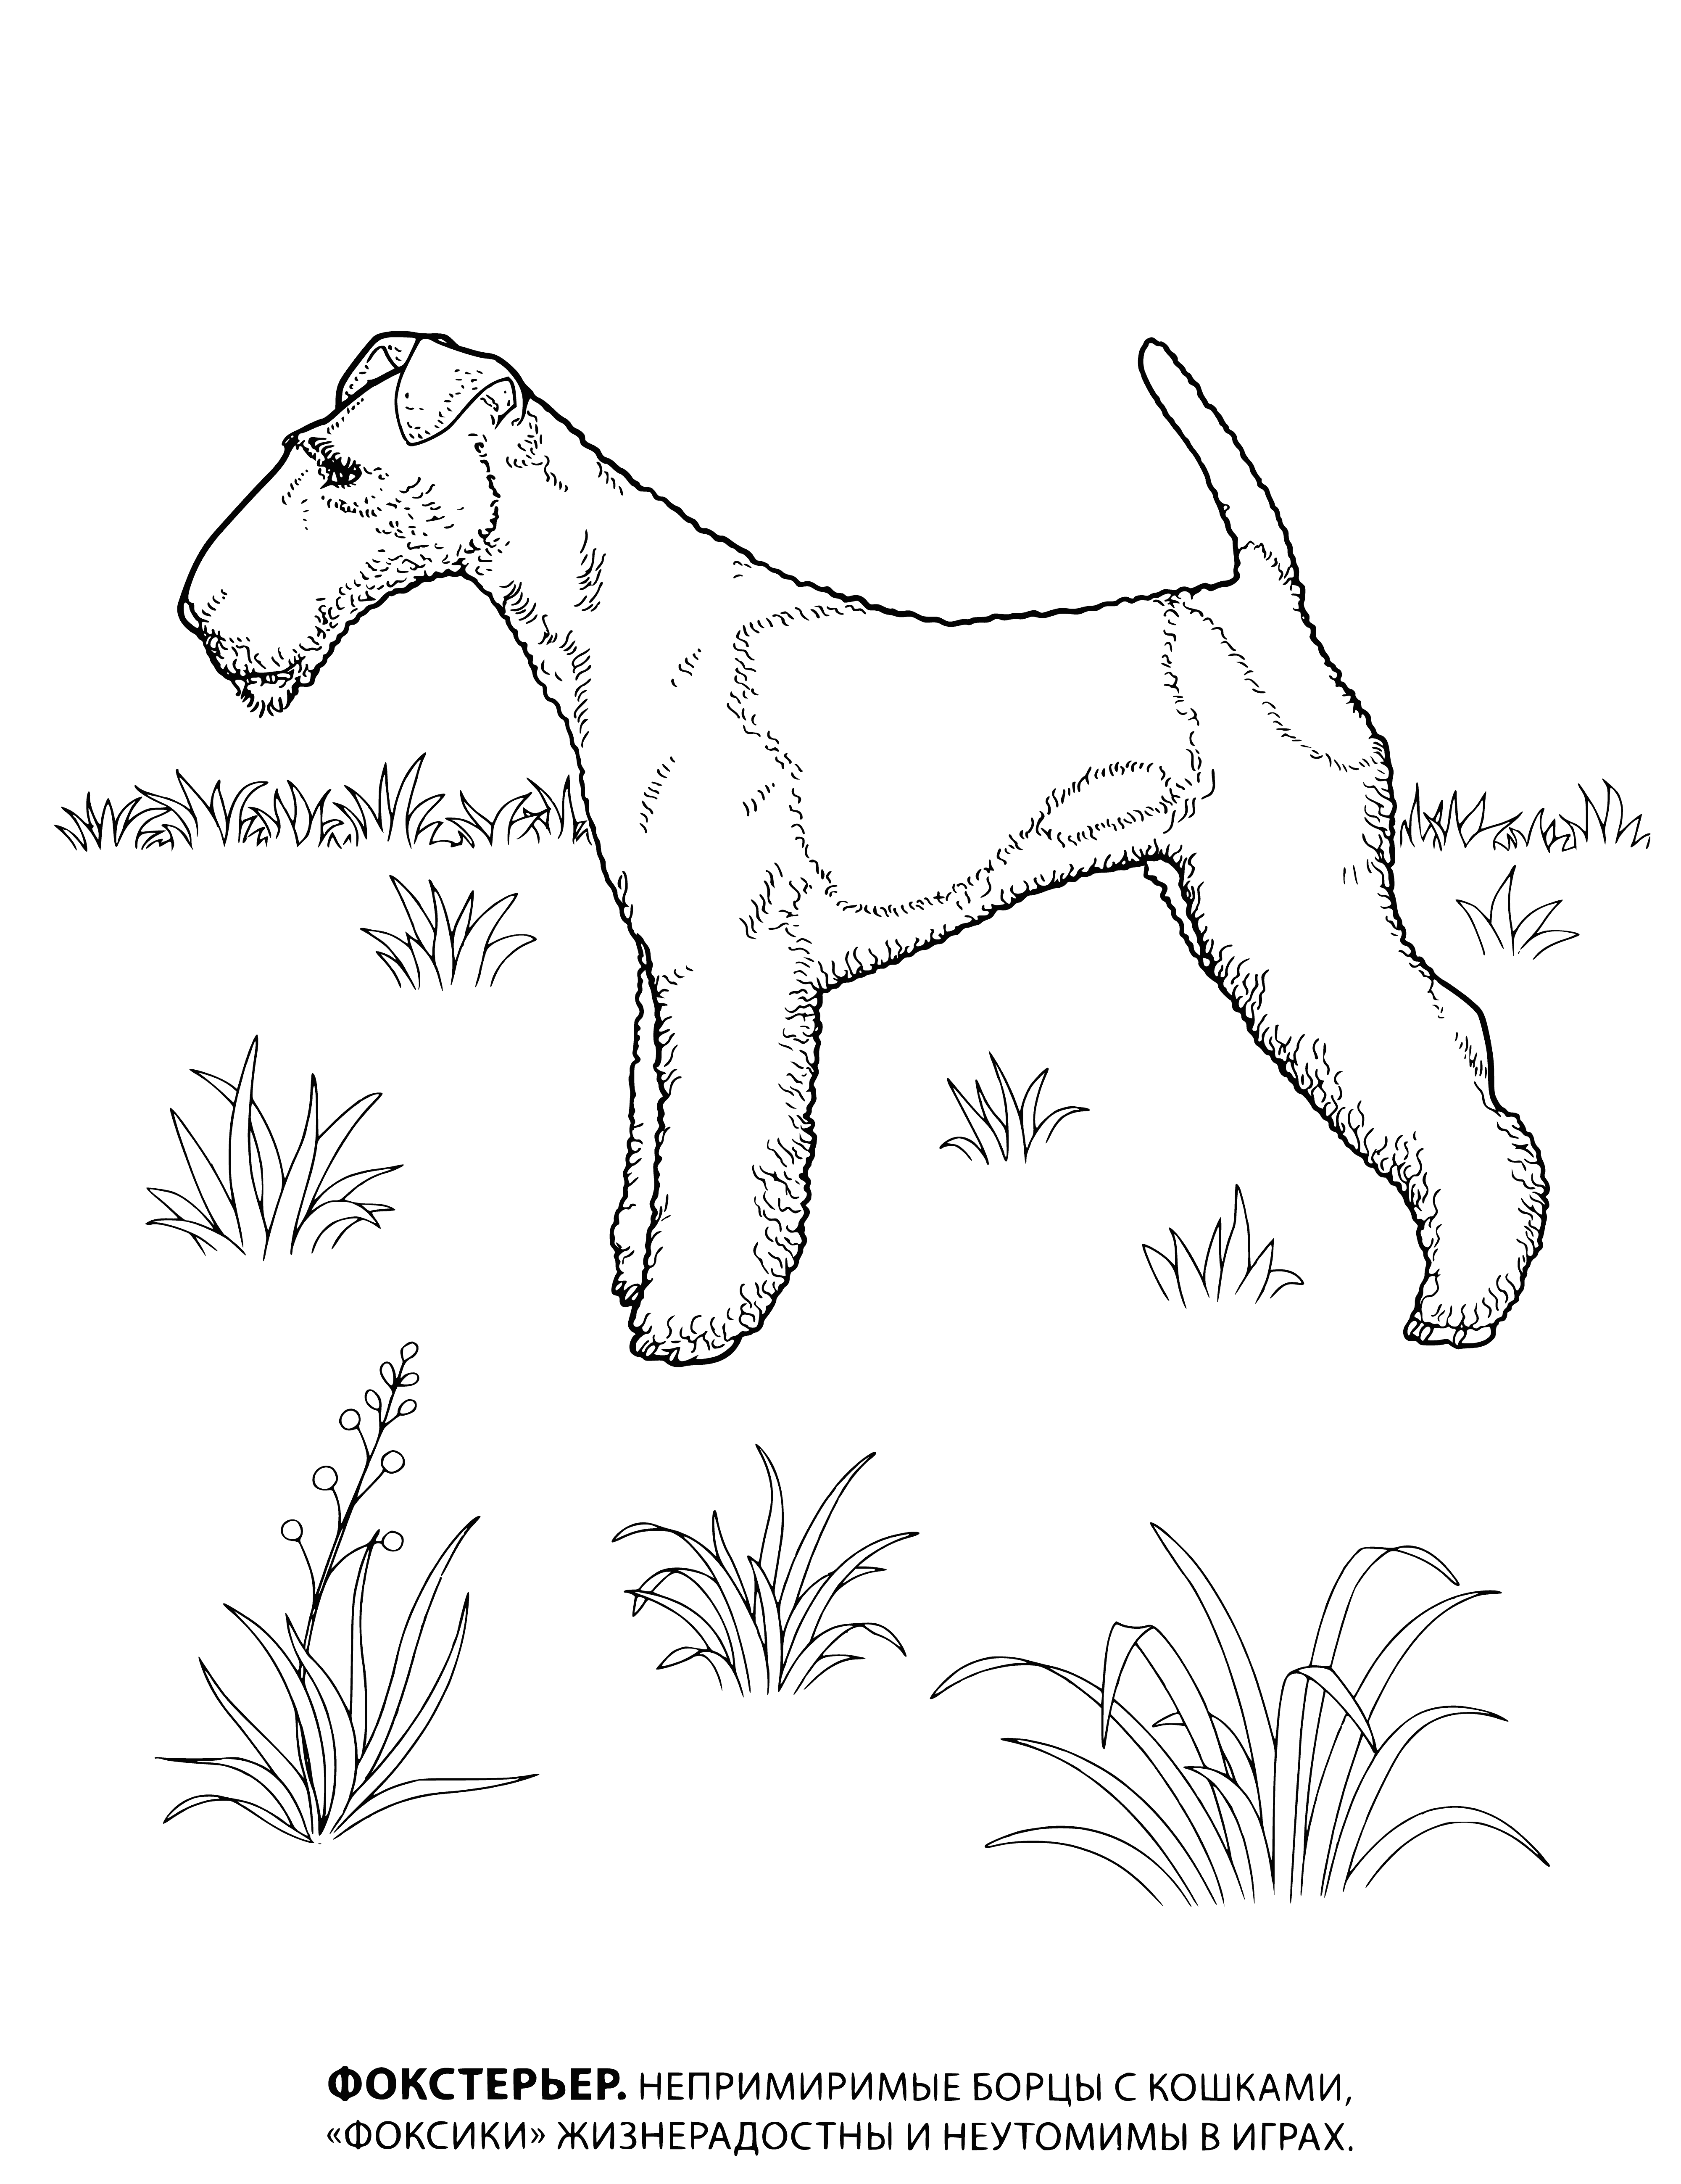 coloring page: Small brown & white dog w/pointy ears & long tail stands on grass. Tree & fence in background.